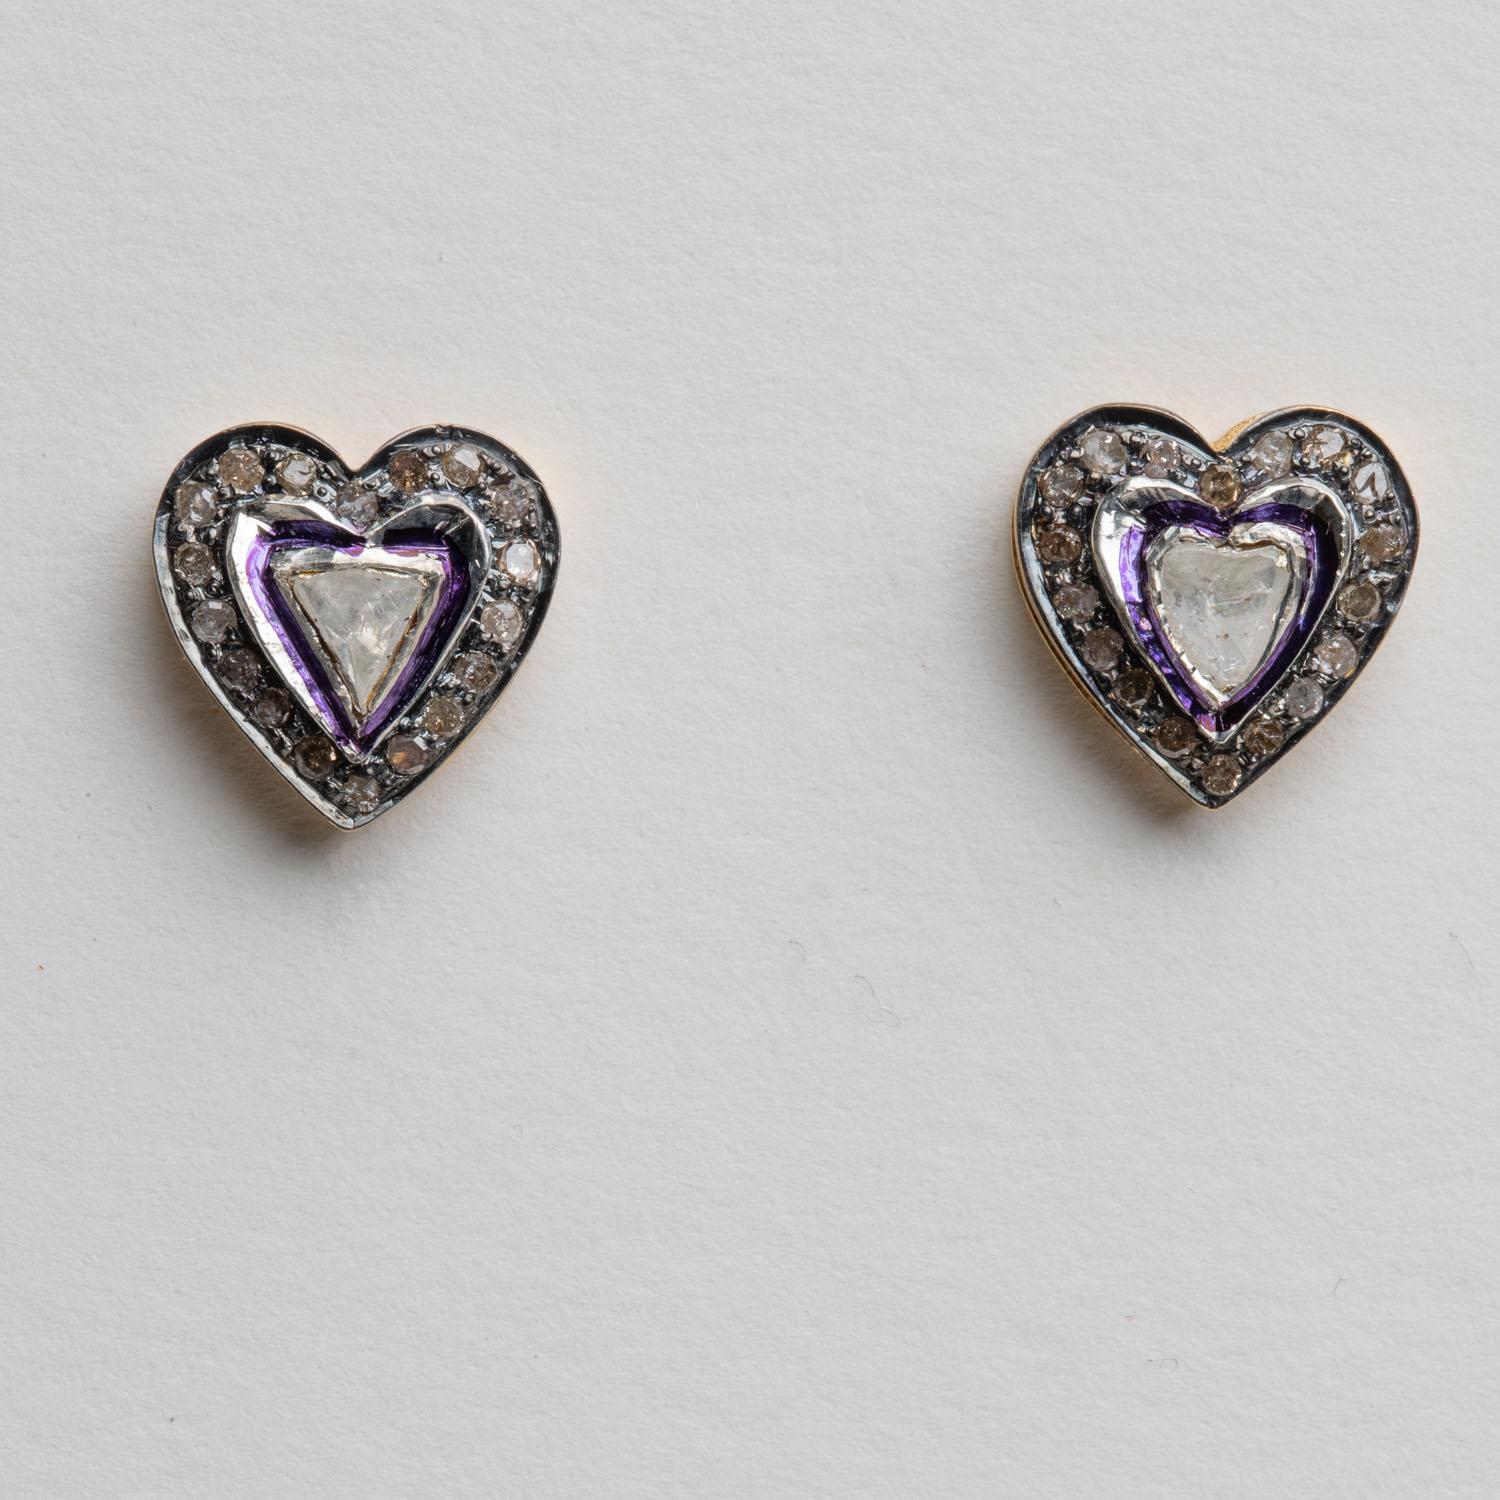 Rosecut Diamond Stud Earrings In Excellent Condition For Sale In Nantucket, MA